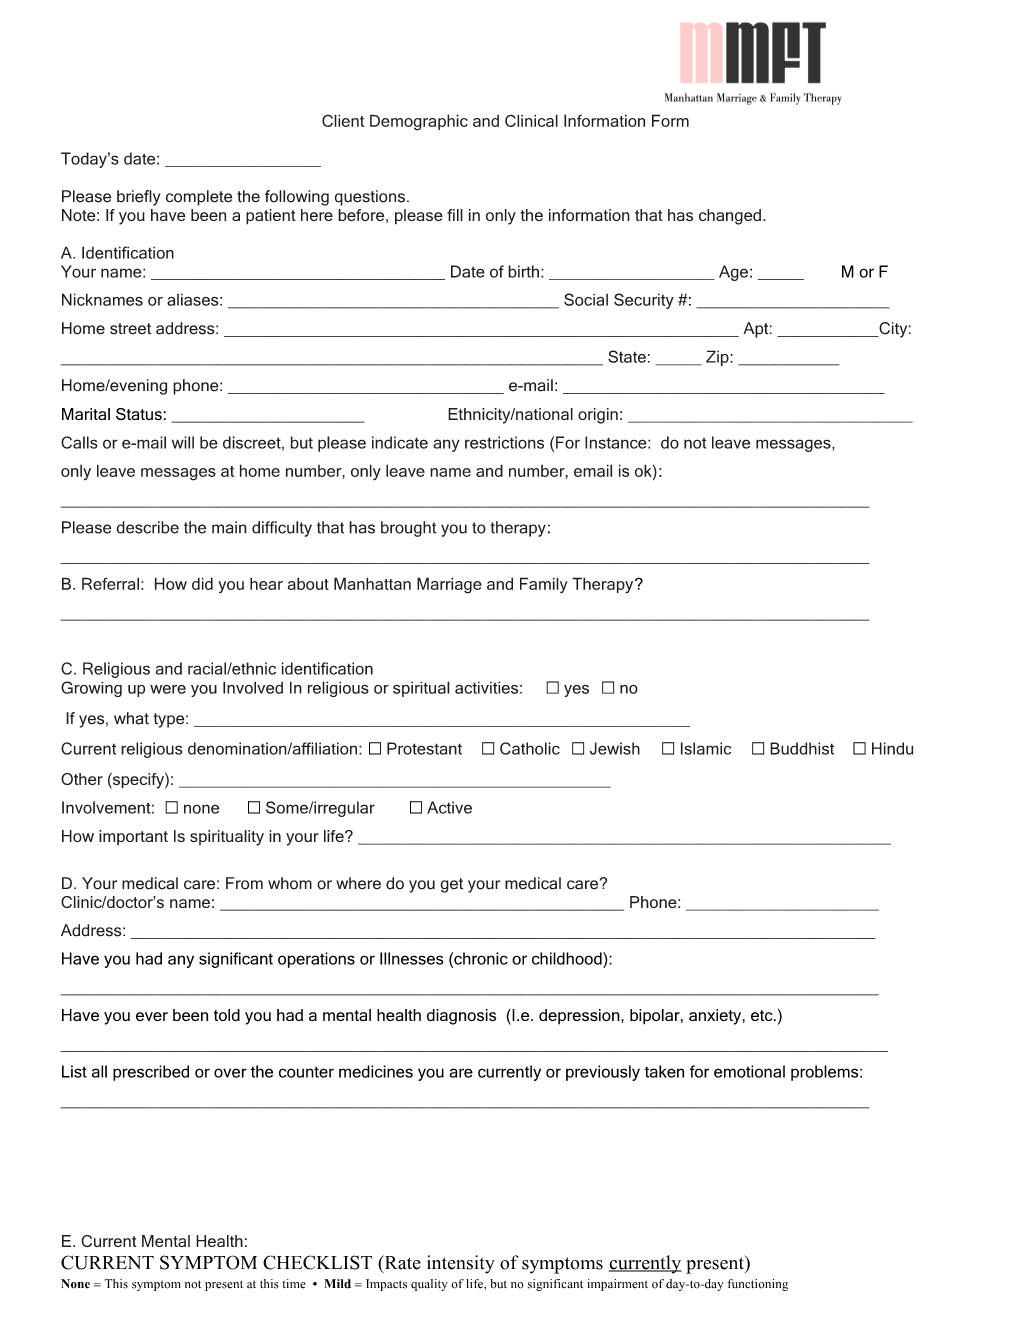 Client Demographic and Clinical Information Form